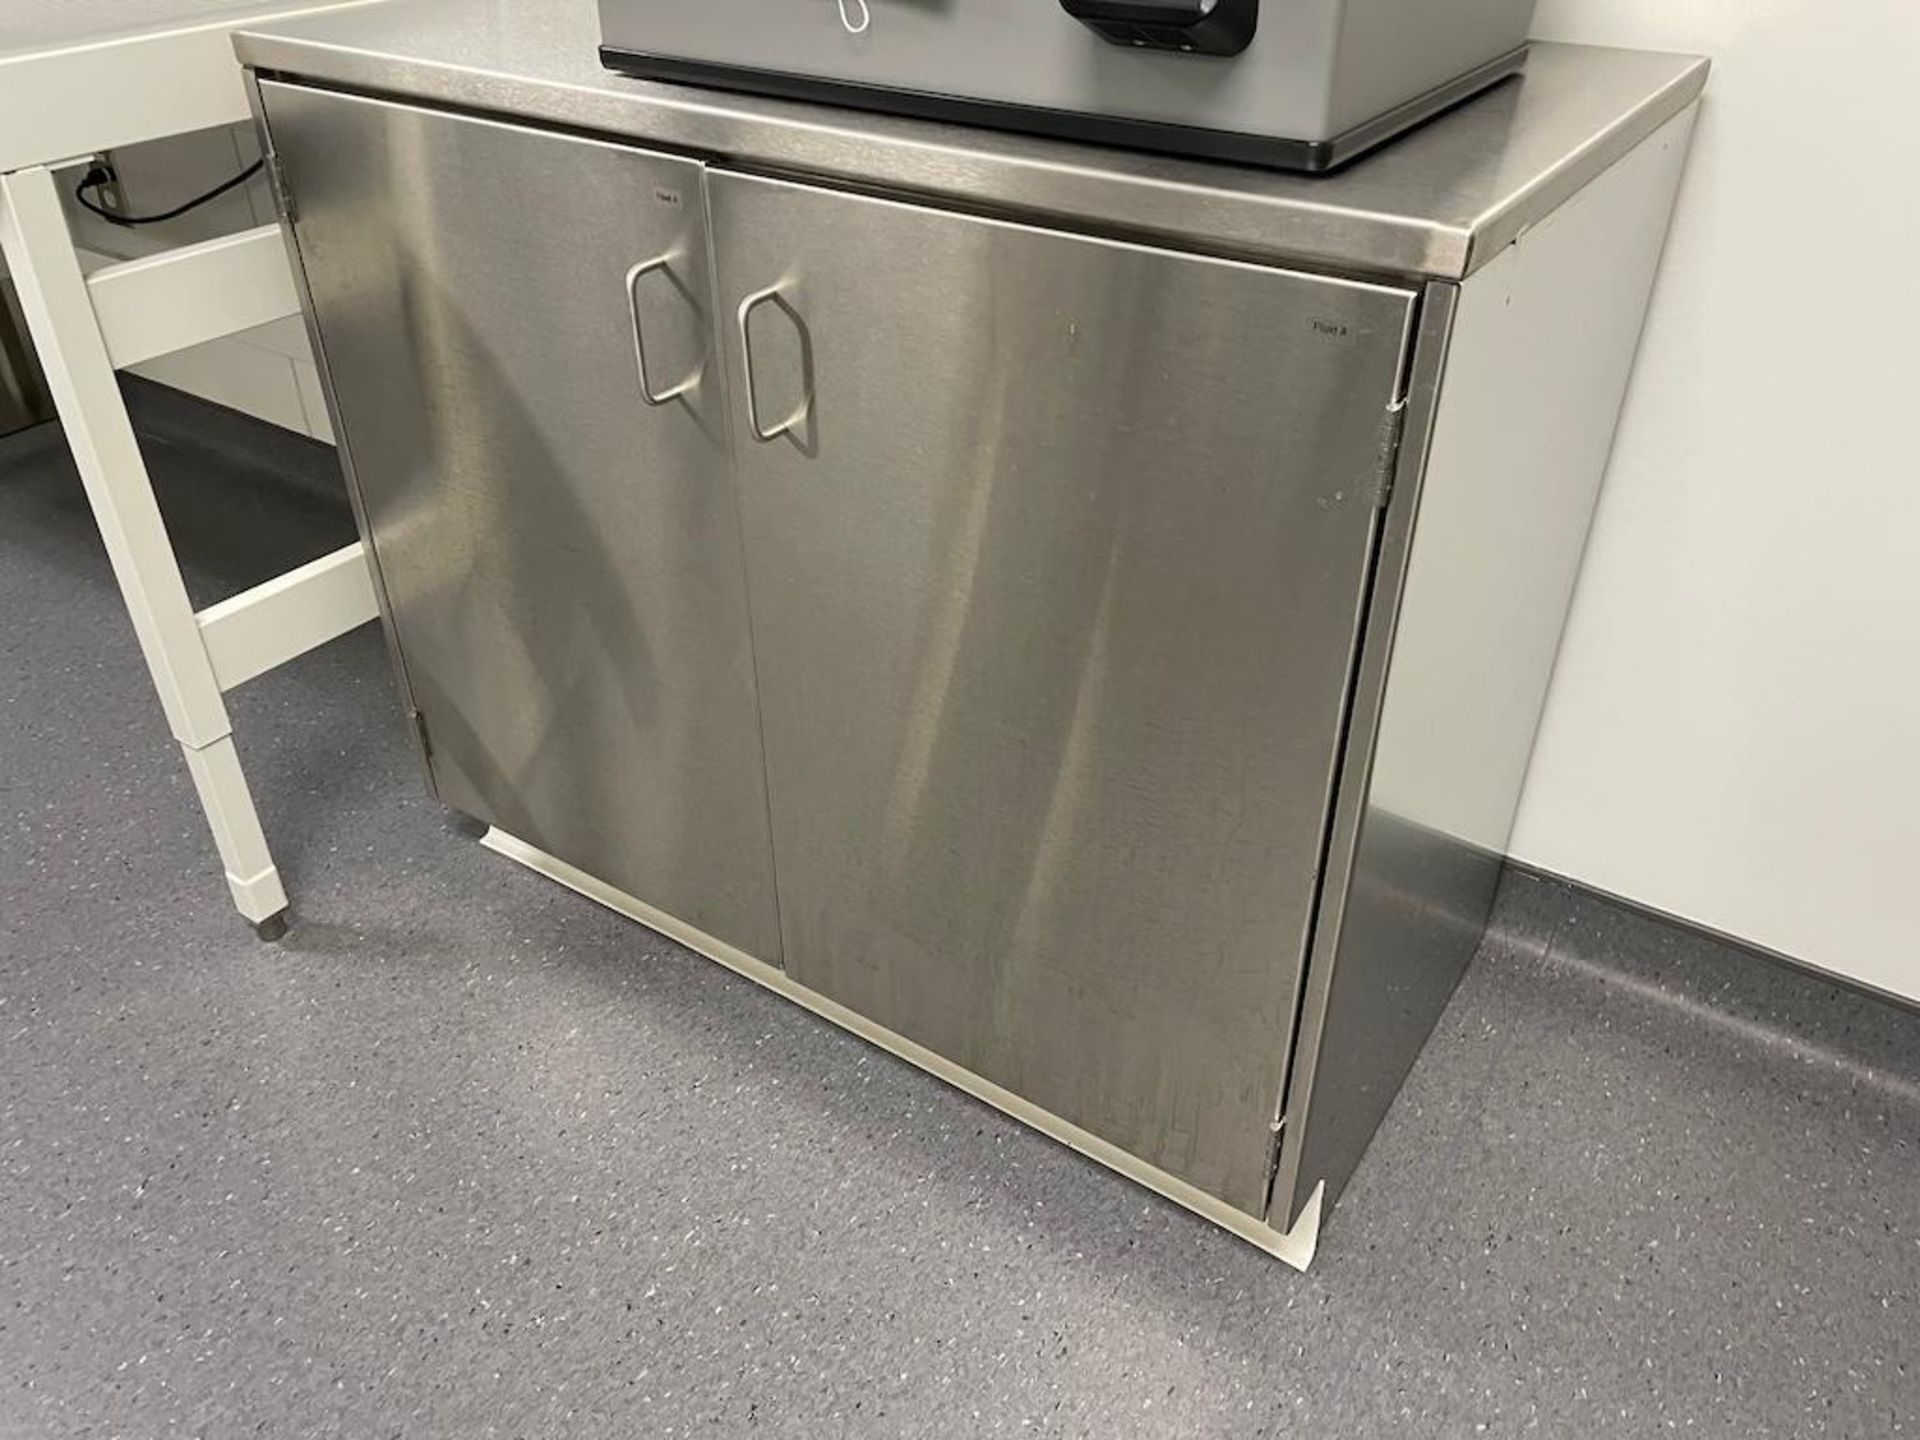 LOT (2) STAINLESS STEEL LAB TABLES APPROX 76 X 33 IN, 36 X 30 IN, (2) STAINLESS STEEL 2 DOOR CABINET - Image 5 of 6